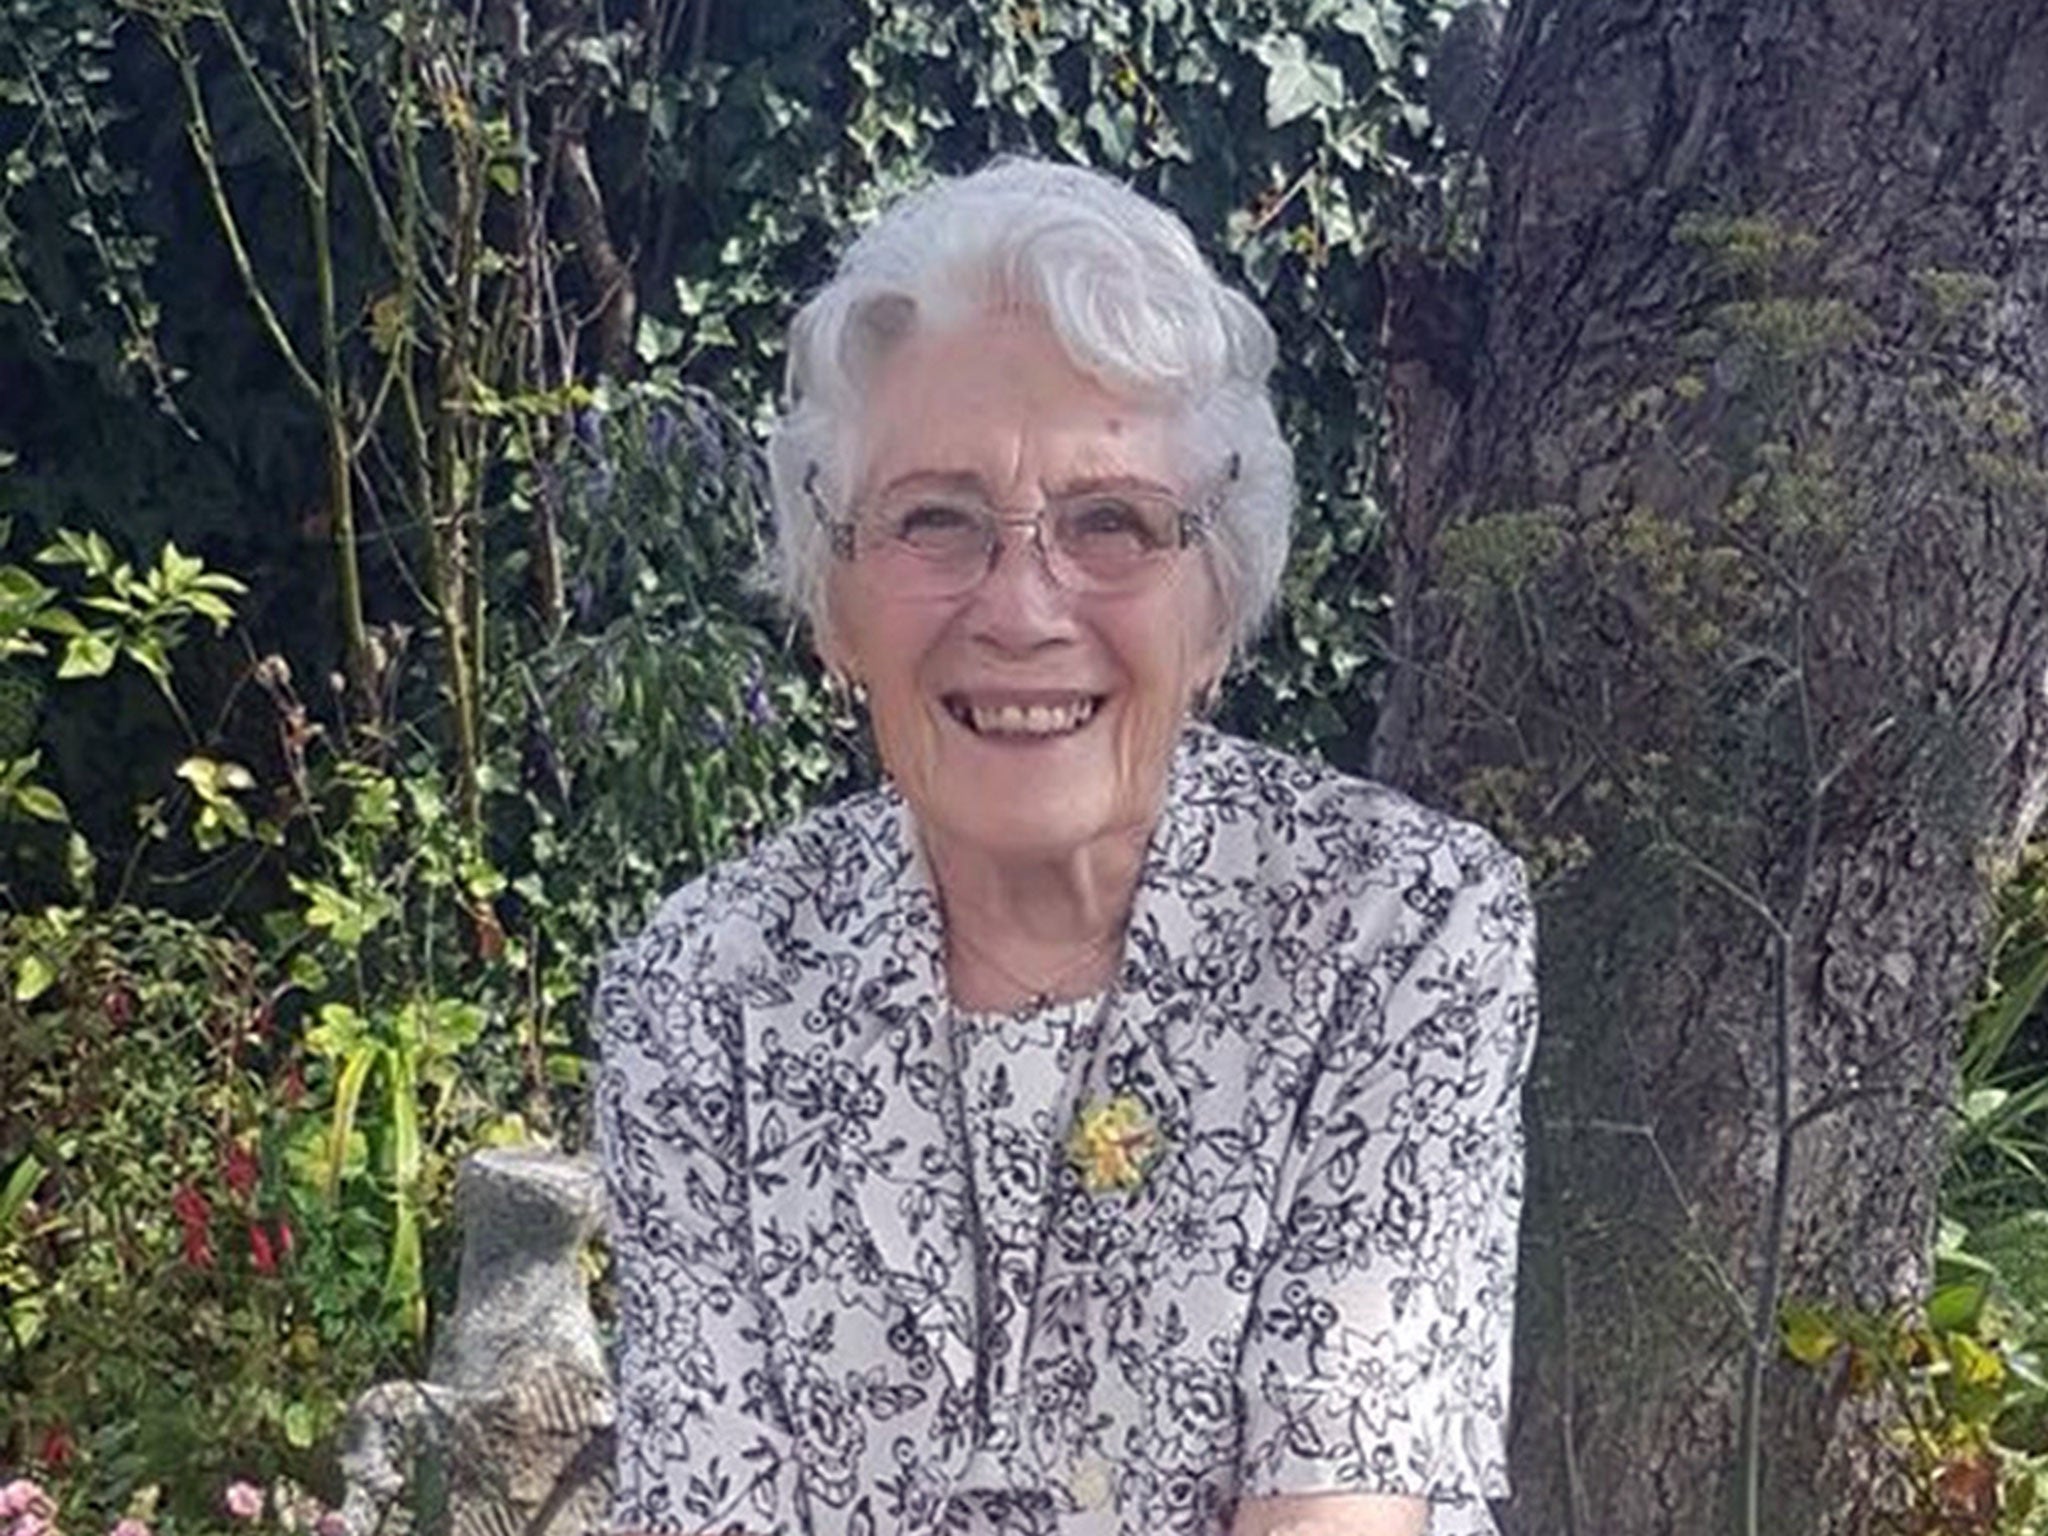 A murder investigation has been launched after Rosina Coleman, 85, was found dead at her home in Ashmour Gardens, Romford, east London